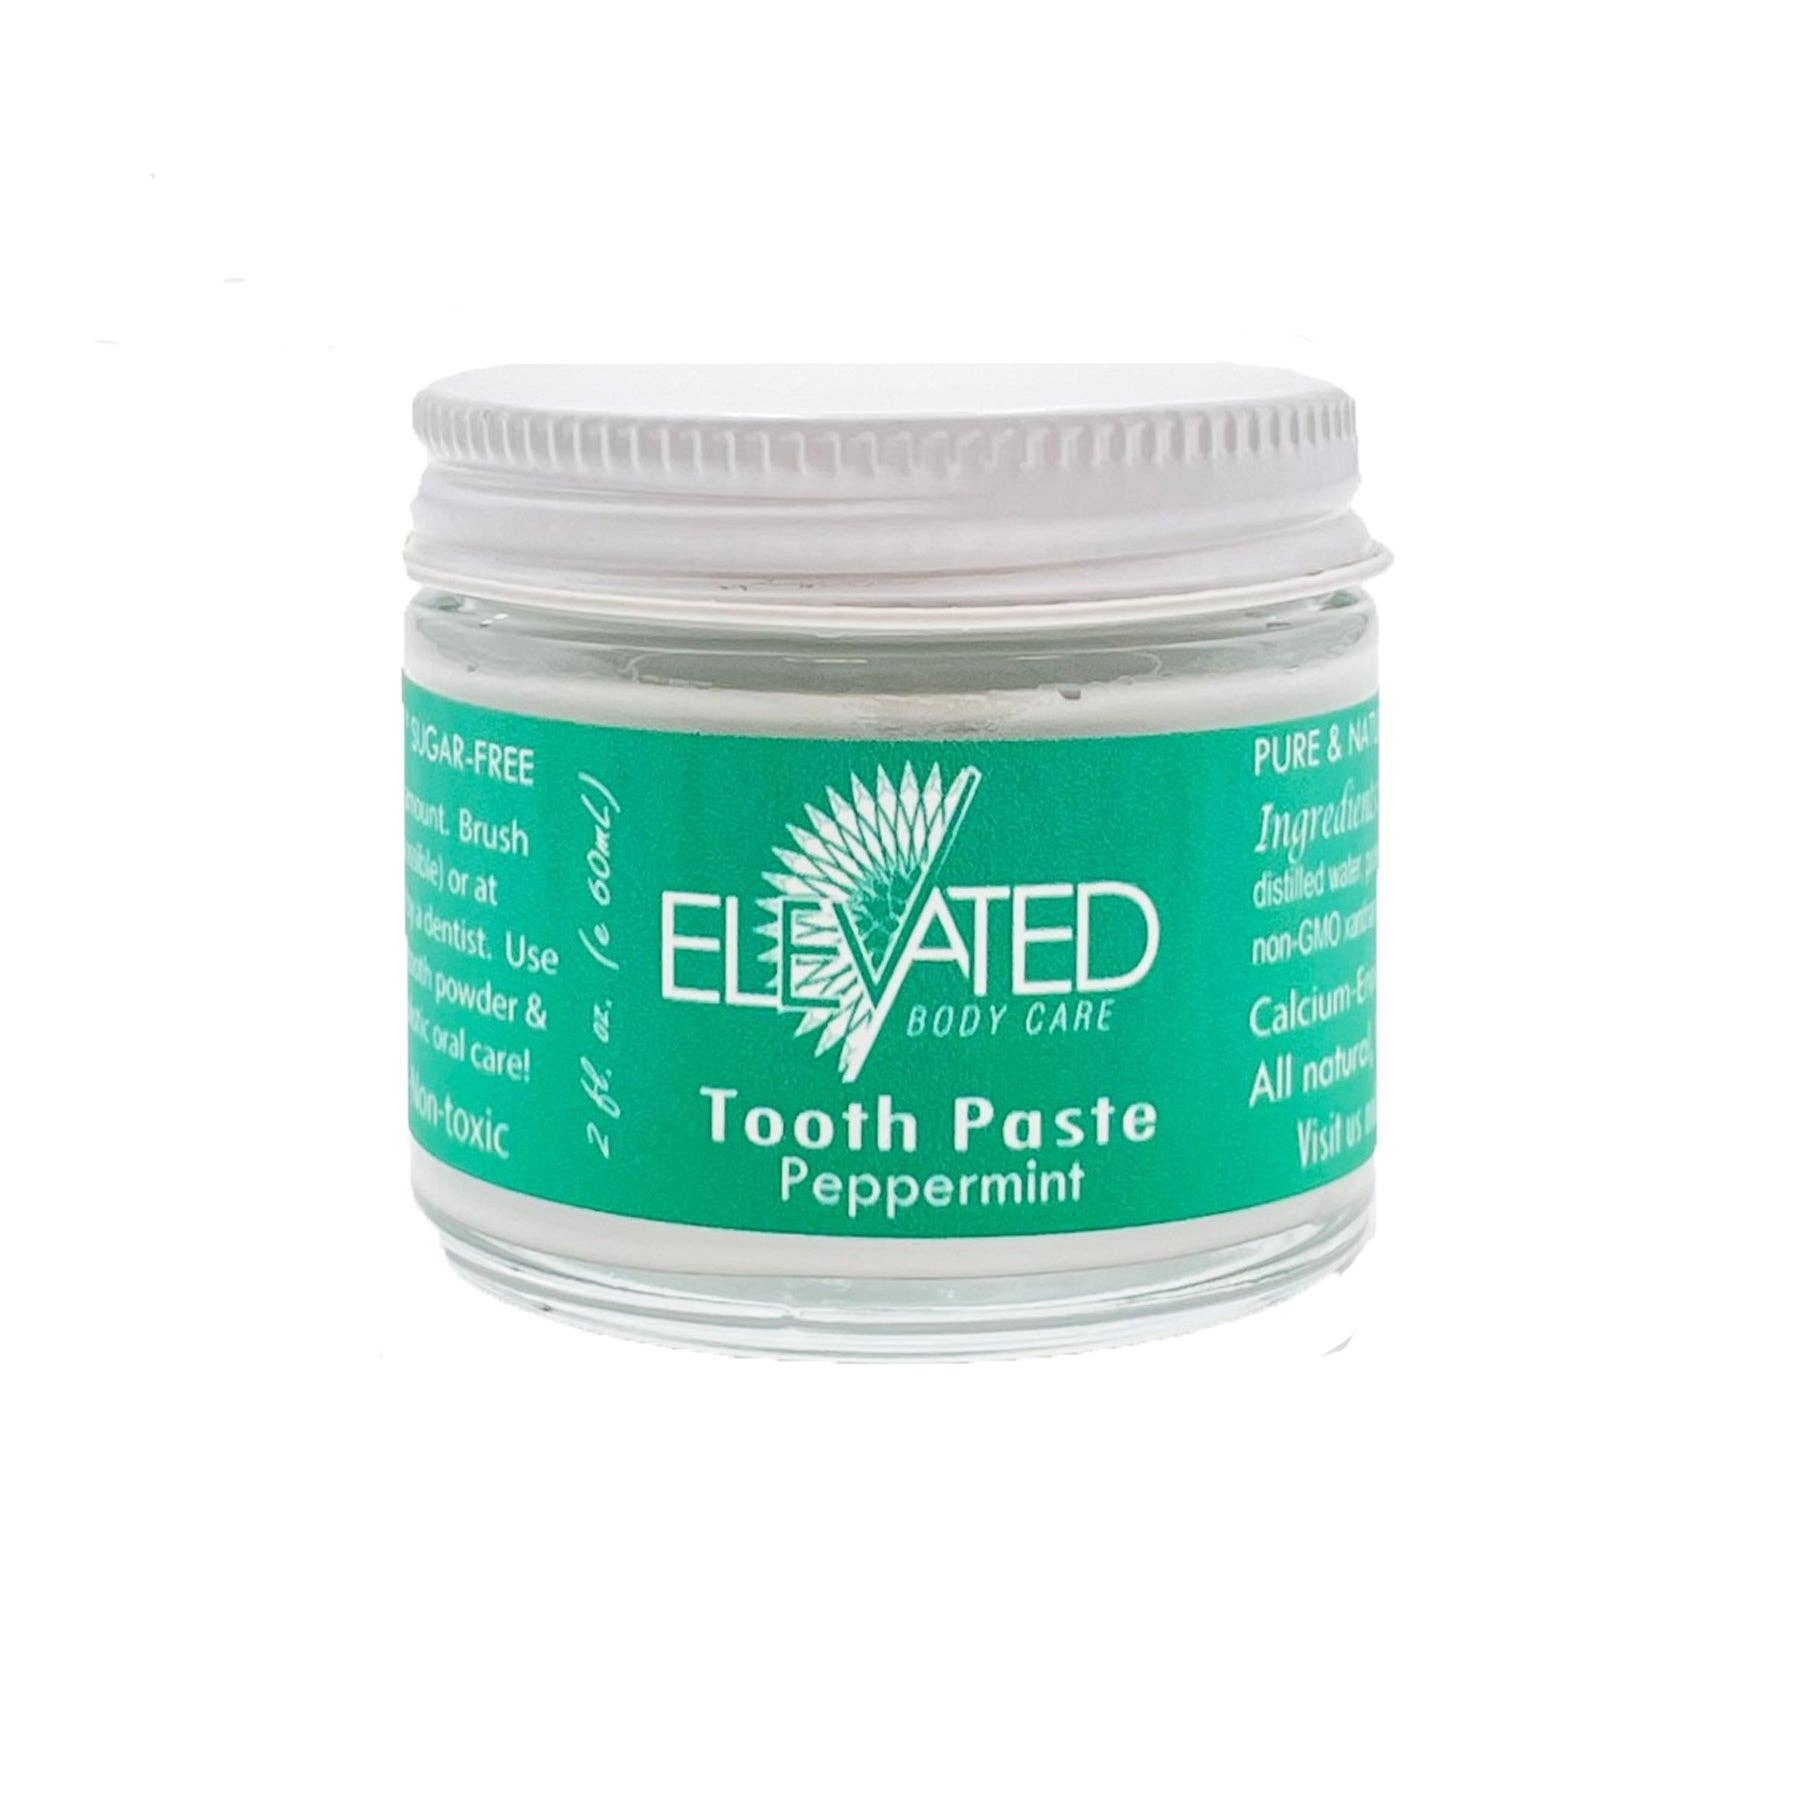 ELEVATED - Natural Toothpaste - Fluoride FREE - Glass Jar